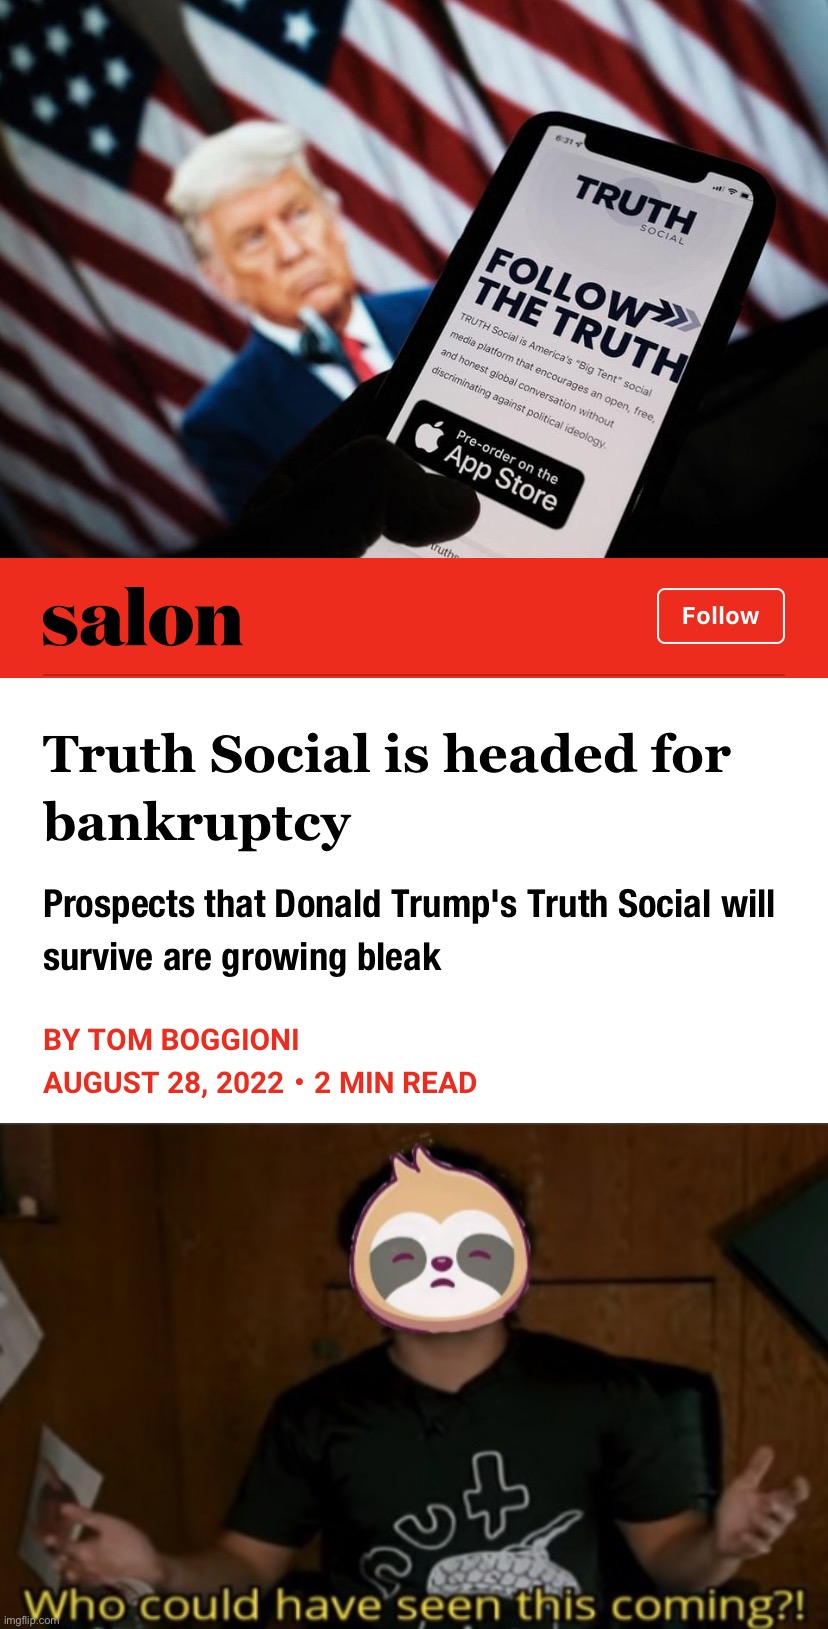 Wow, that’s crazy | image tagged in truth social is headed for bankruptcy,trump is an asshole,donald trump is an idiot,truth social,social media,bankruptcy | made w/ Imgflip meme maker